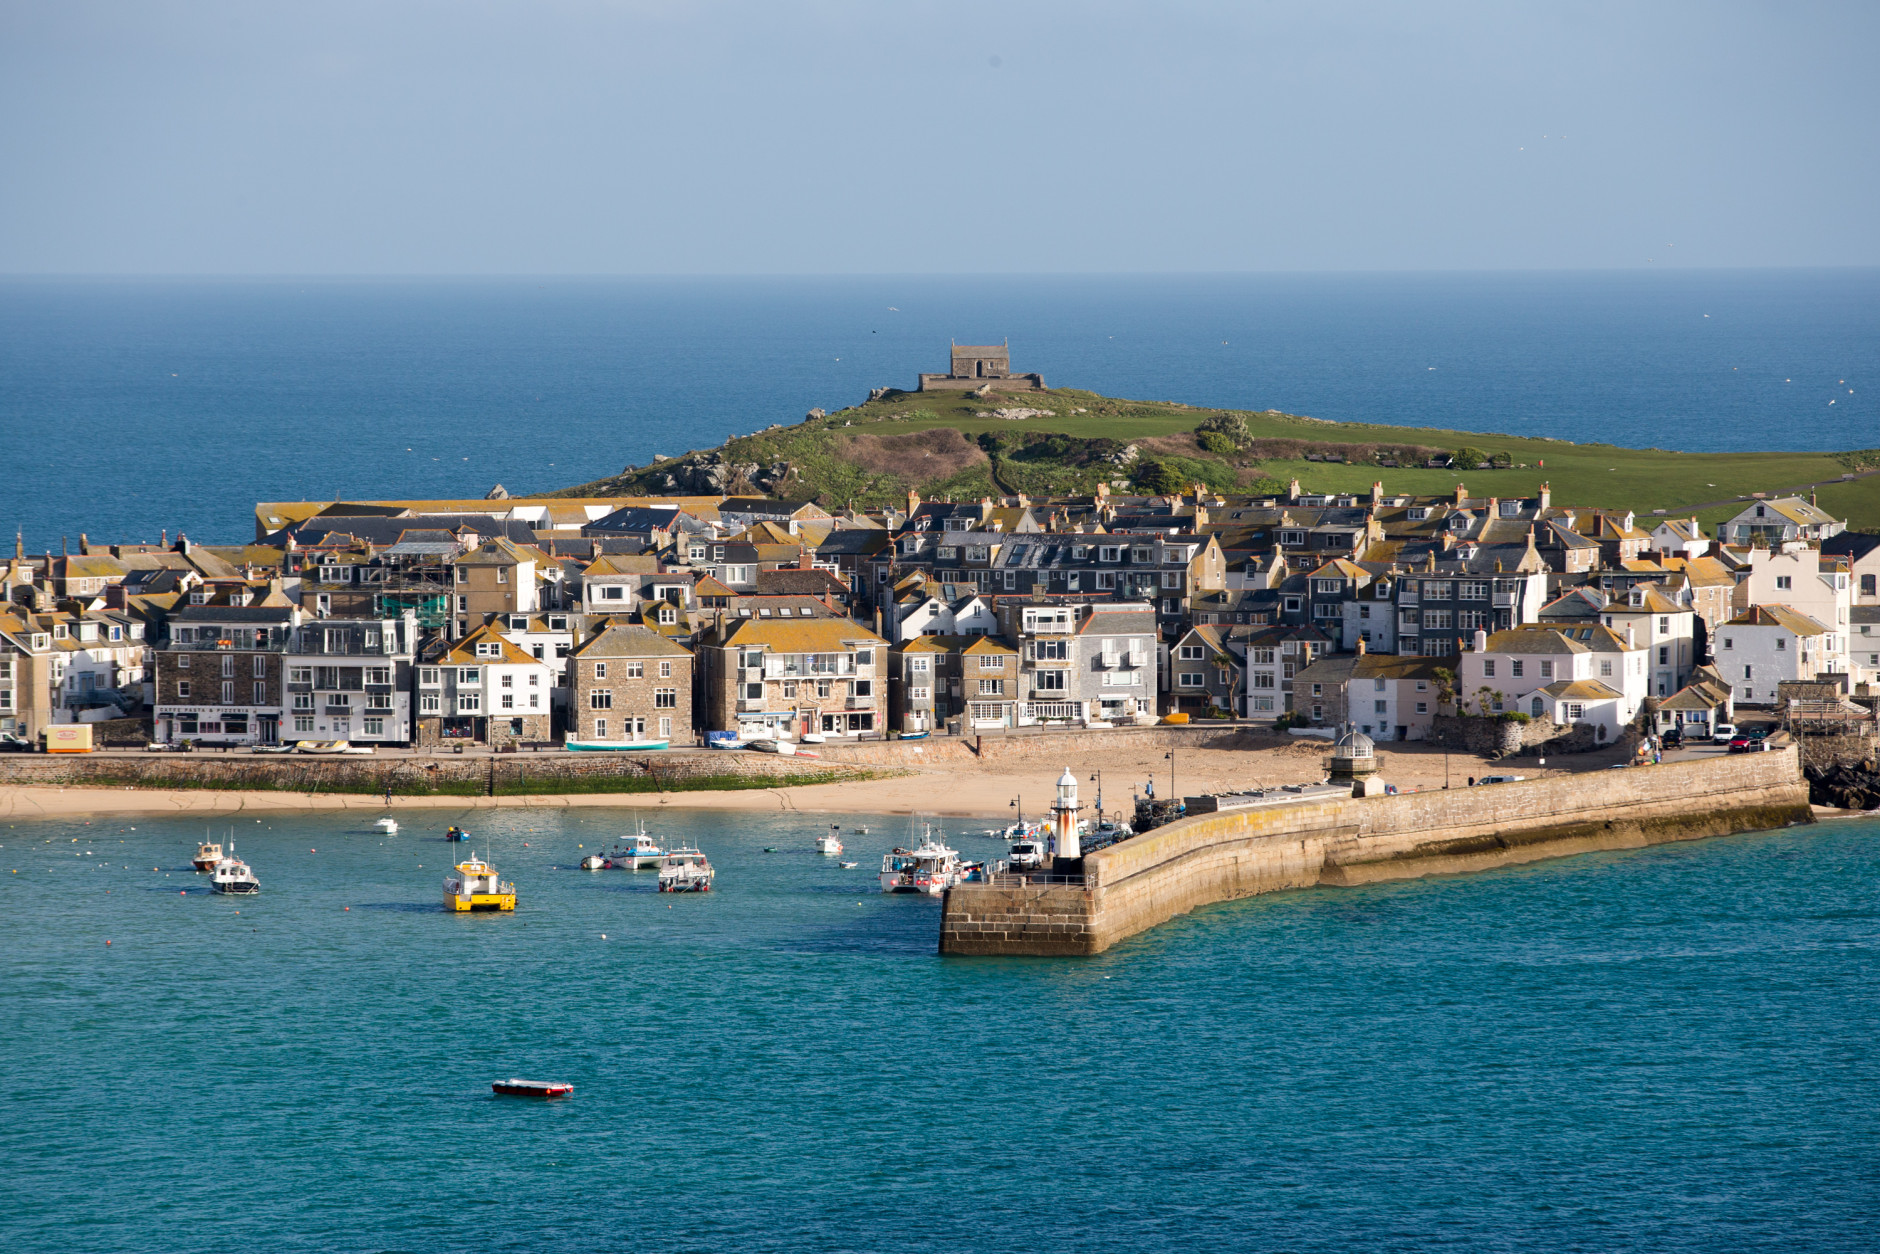 ST IVES, UNITED KINGDOM - APRIL 14:  The morning sun illuminates properties in the popular seaside resort of St Ives on April 14, 2016 in Cornwall, England. Due to the pressures that second and holiday homes are having on the town's housing market the council has asked residents to vote in a referendum on May 5 on a new town plan which includes a promise to restrict second home ownership. If the vote is passed on May 5, all new housing developments will only get permission if the homes are to be reserved by people to live in full time. People whose main residence is elsewhere will not be allowed to buy the property.  (Photo by Matt Cardy/Getty Images)